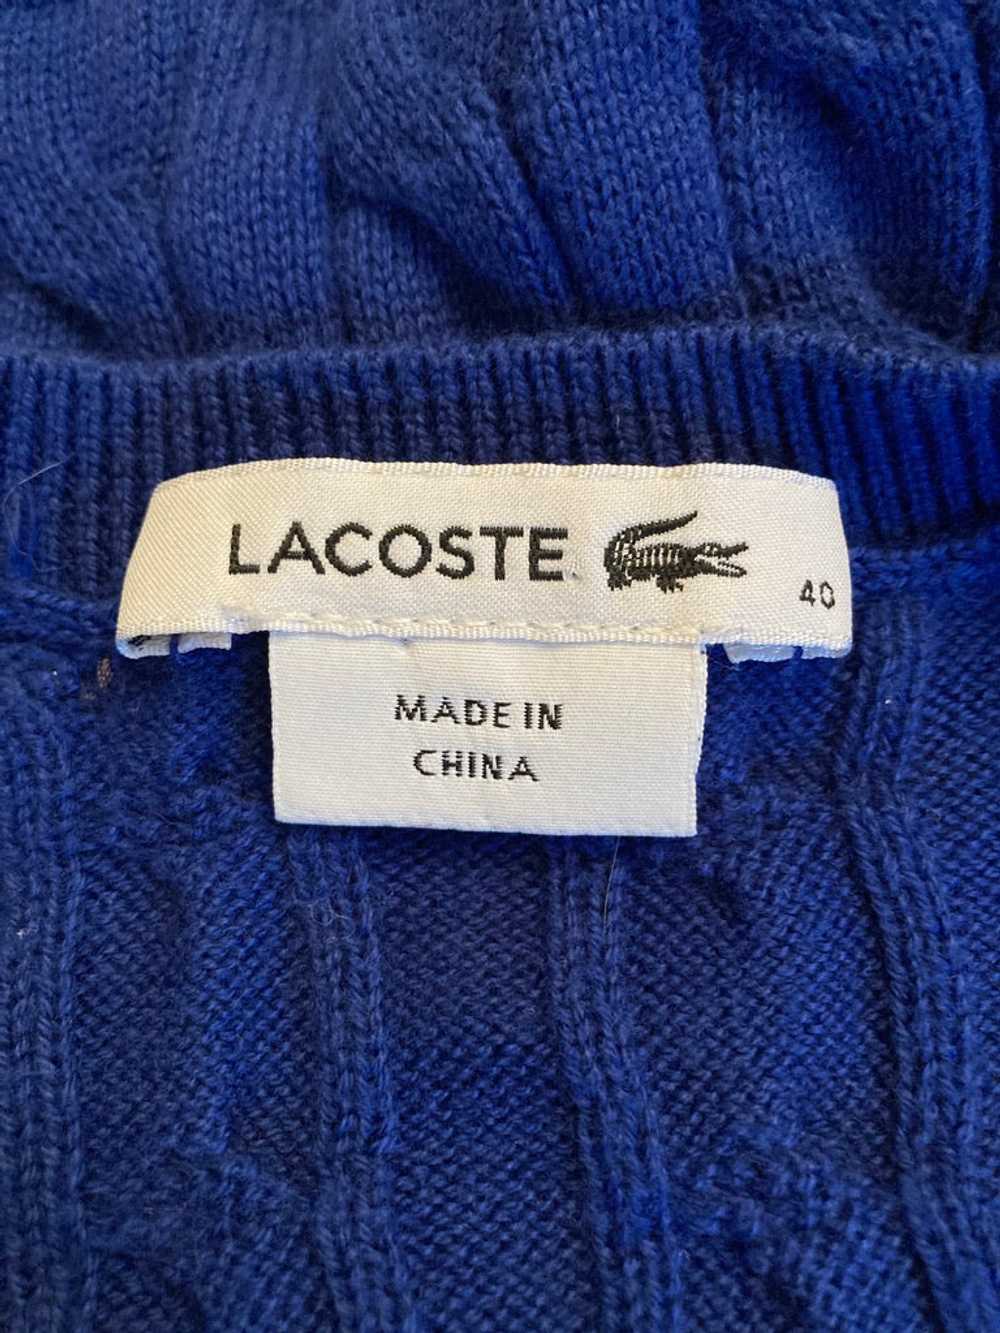 Lacoste Royal Blue Cable Knit Sweater, S - image 6